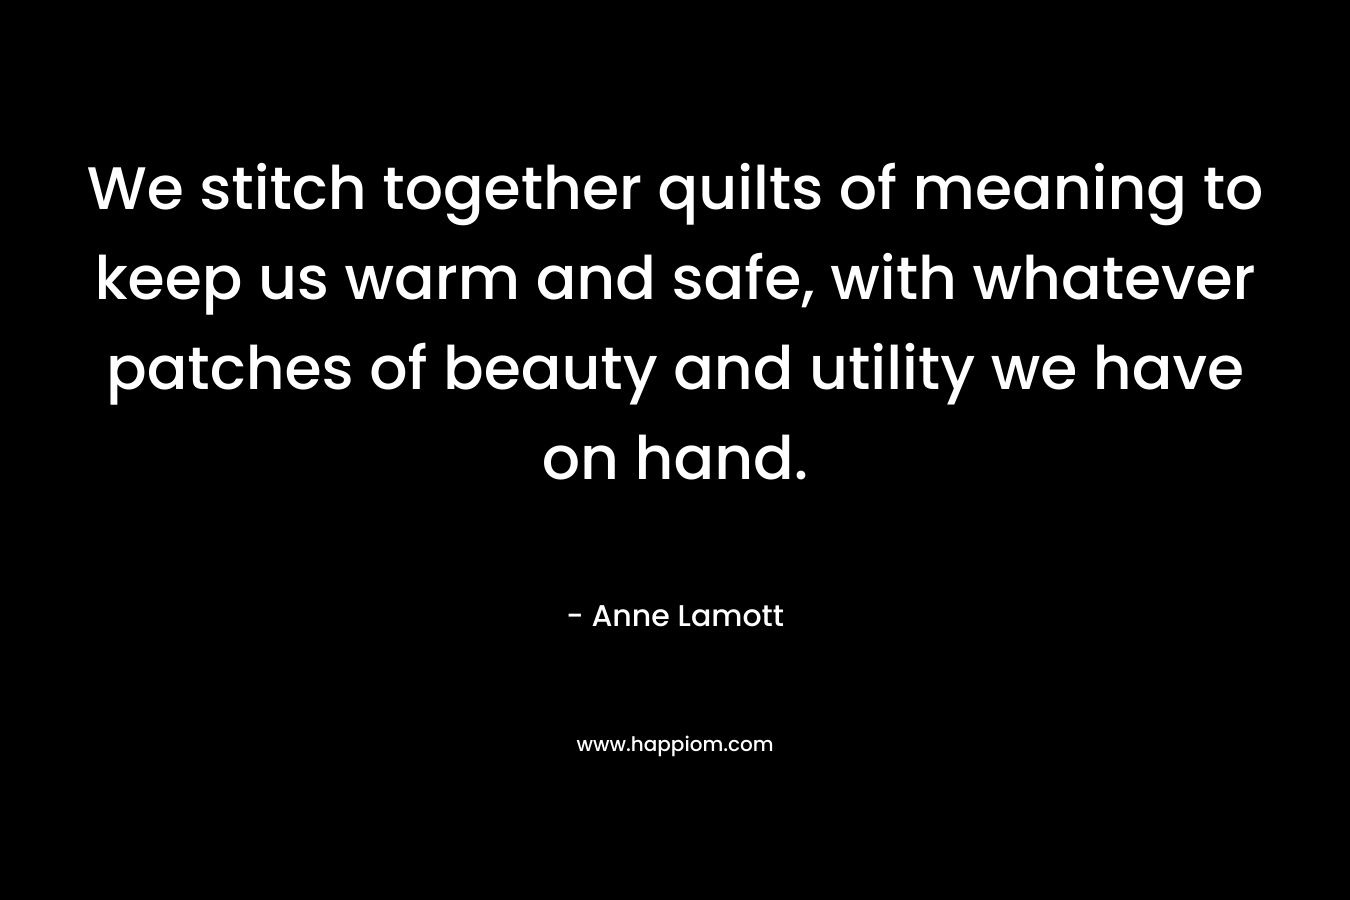 We stitch together quilts of meaning to keep us warm and safe, with whatever patches of beauty and utility we have on hand. – Anne Lamott